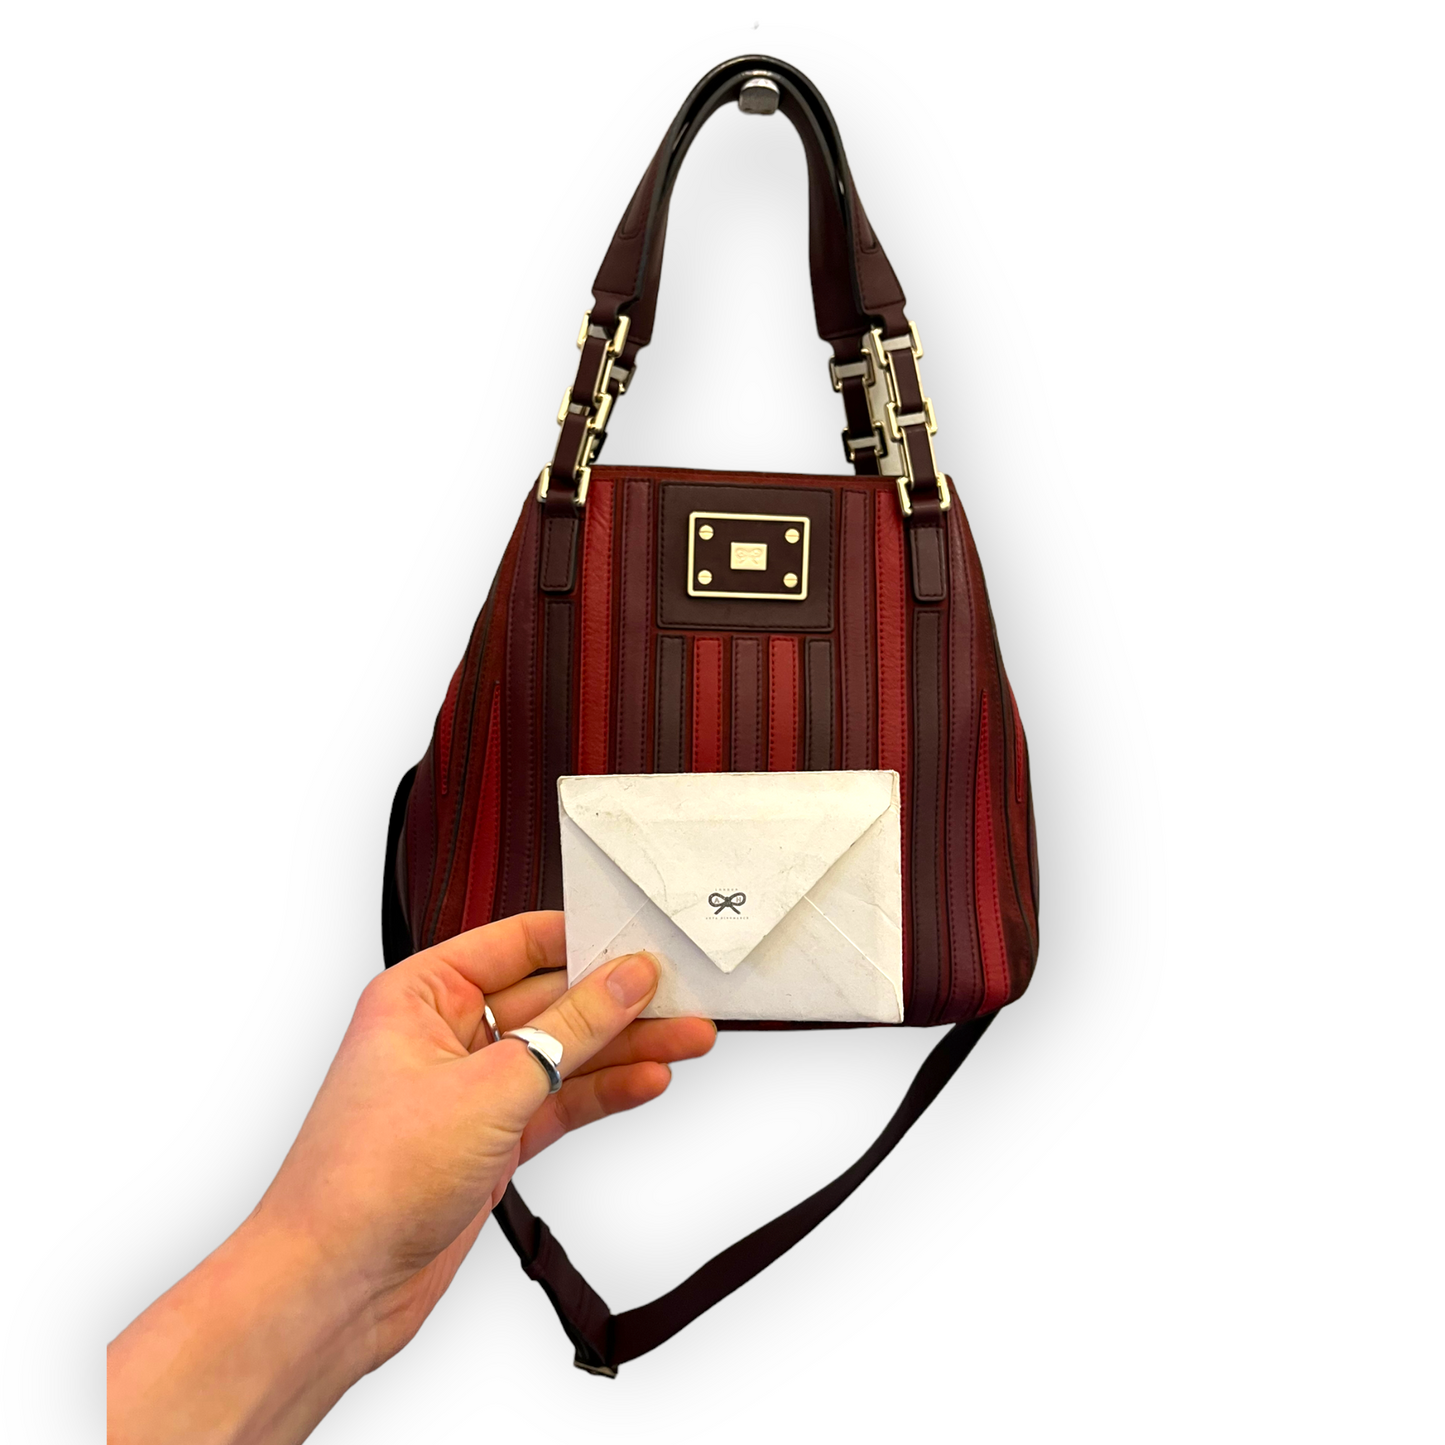 Anya Hindmarch Red Belvedere Bag